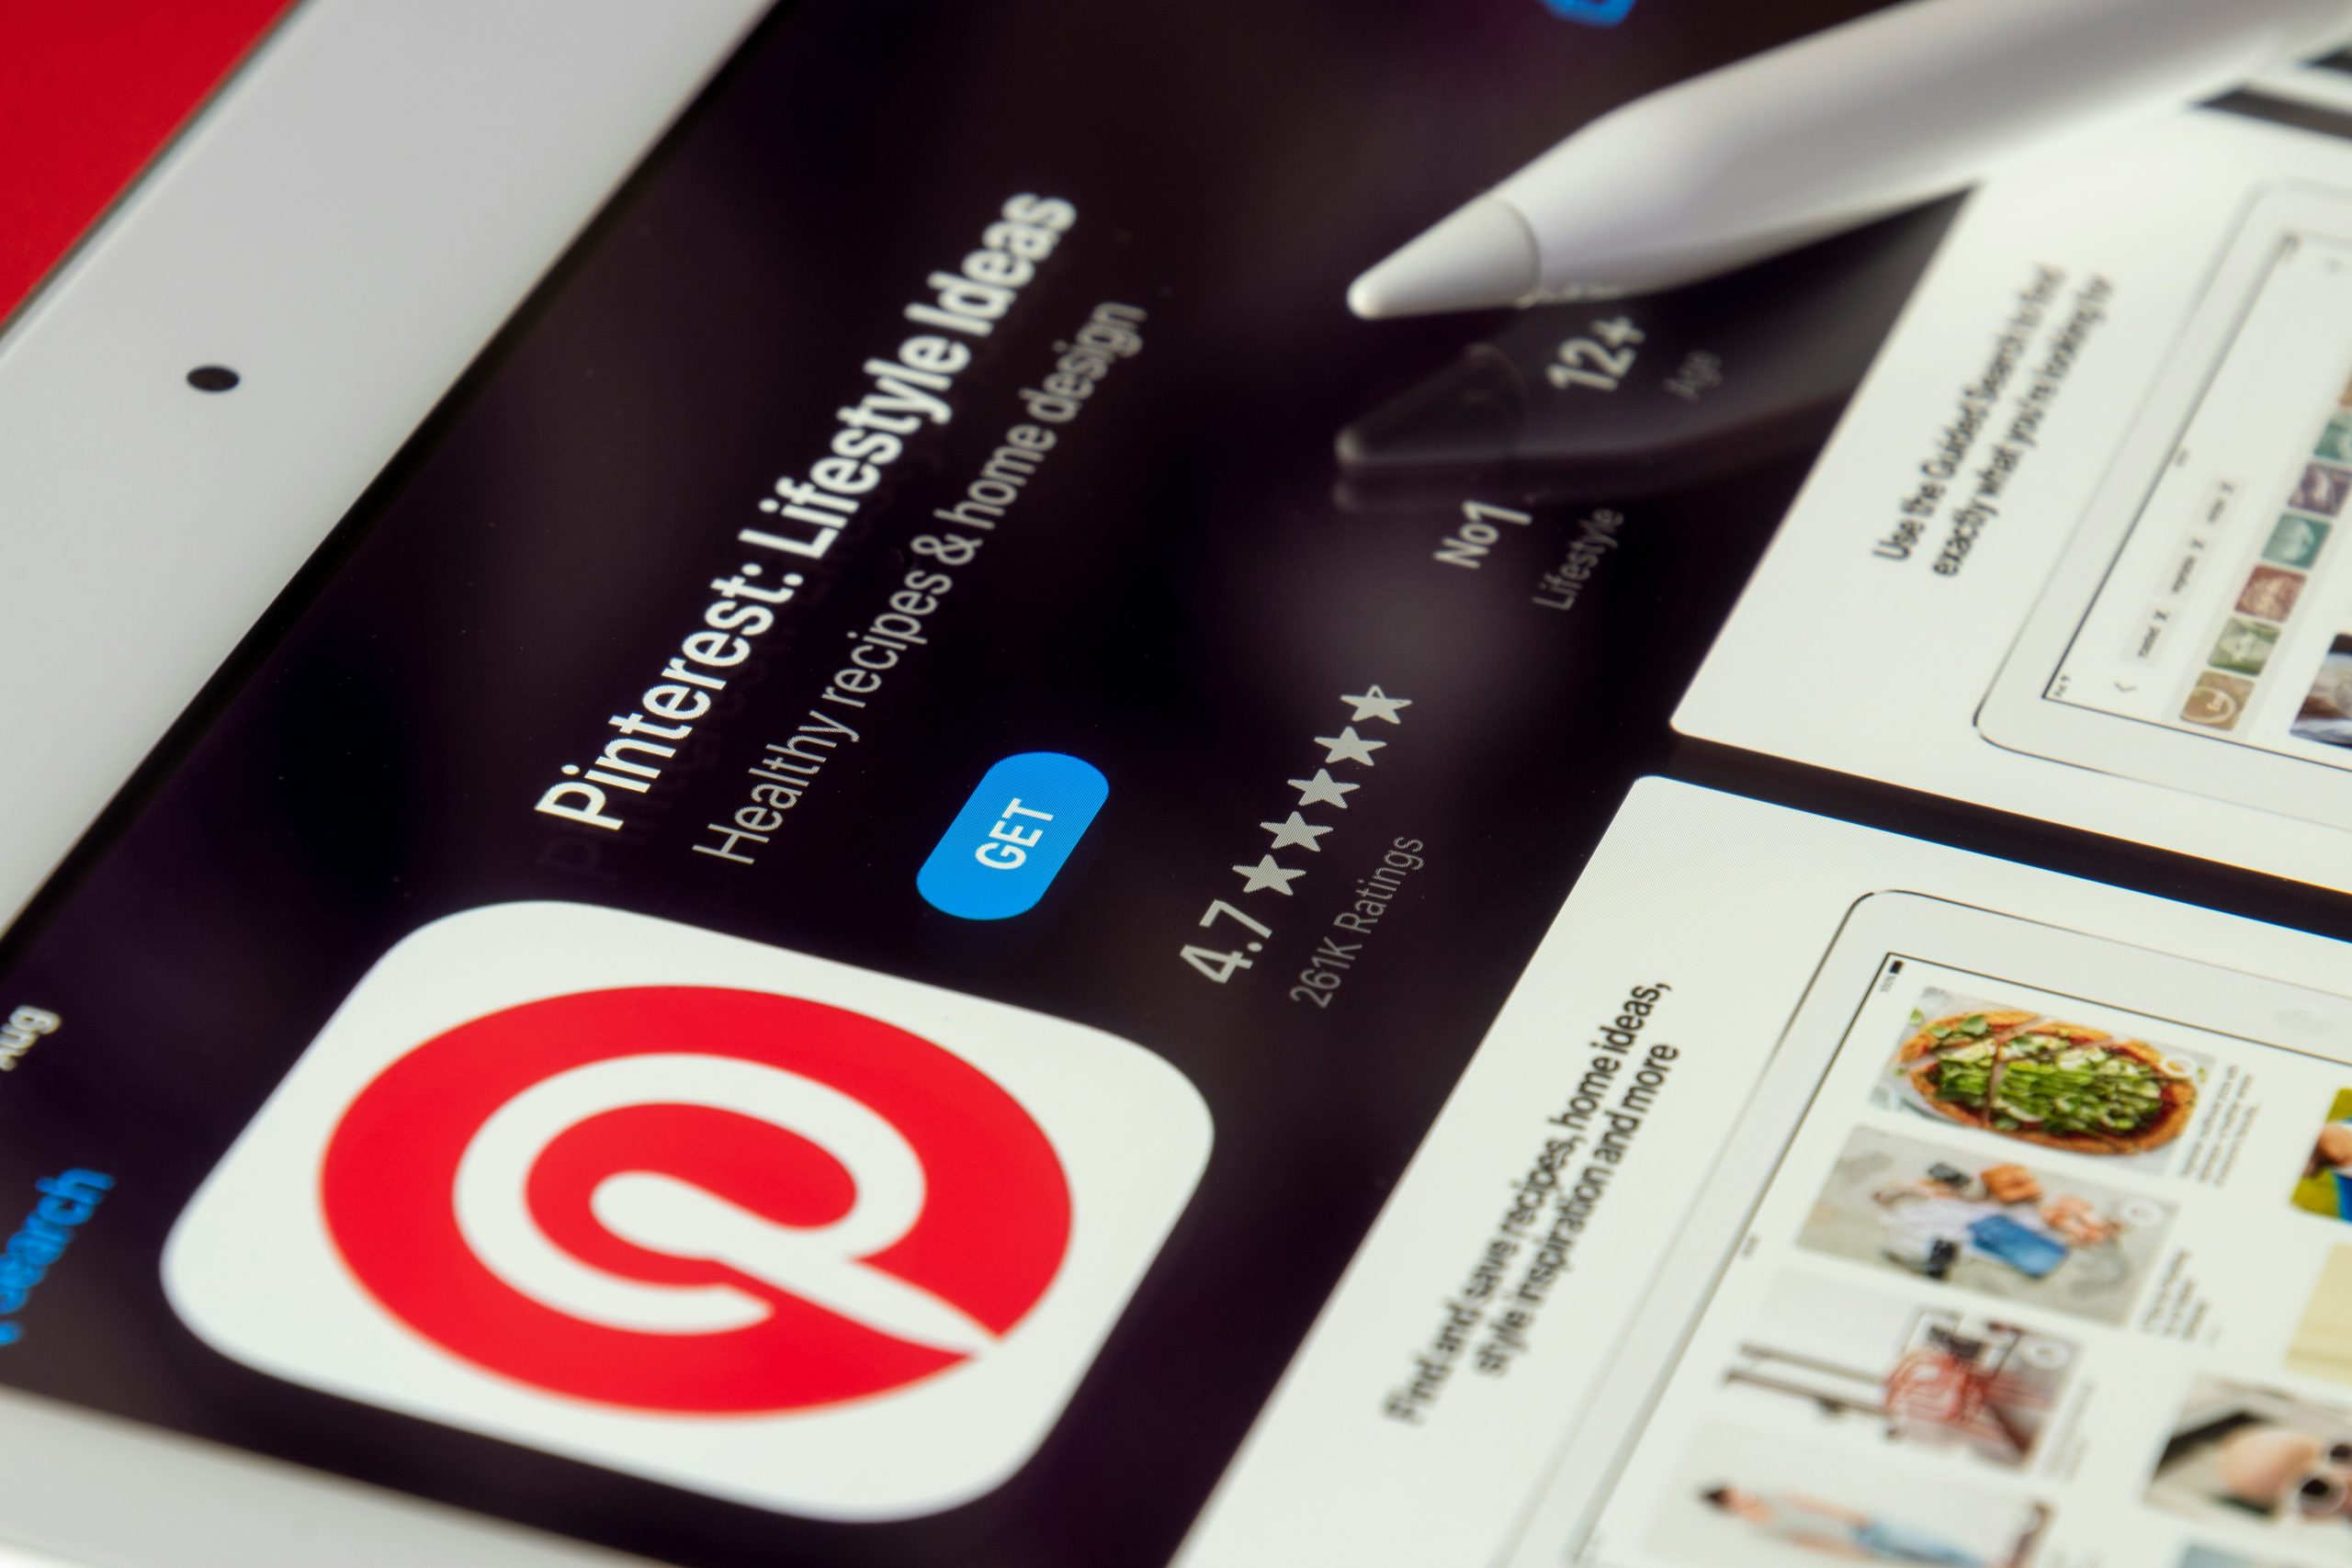 Pinterest ramps up ad revenue with new Google partnership